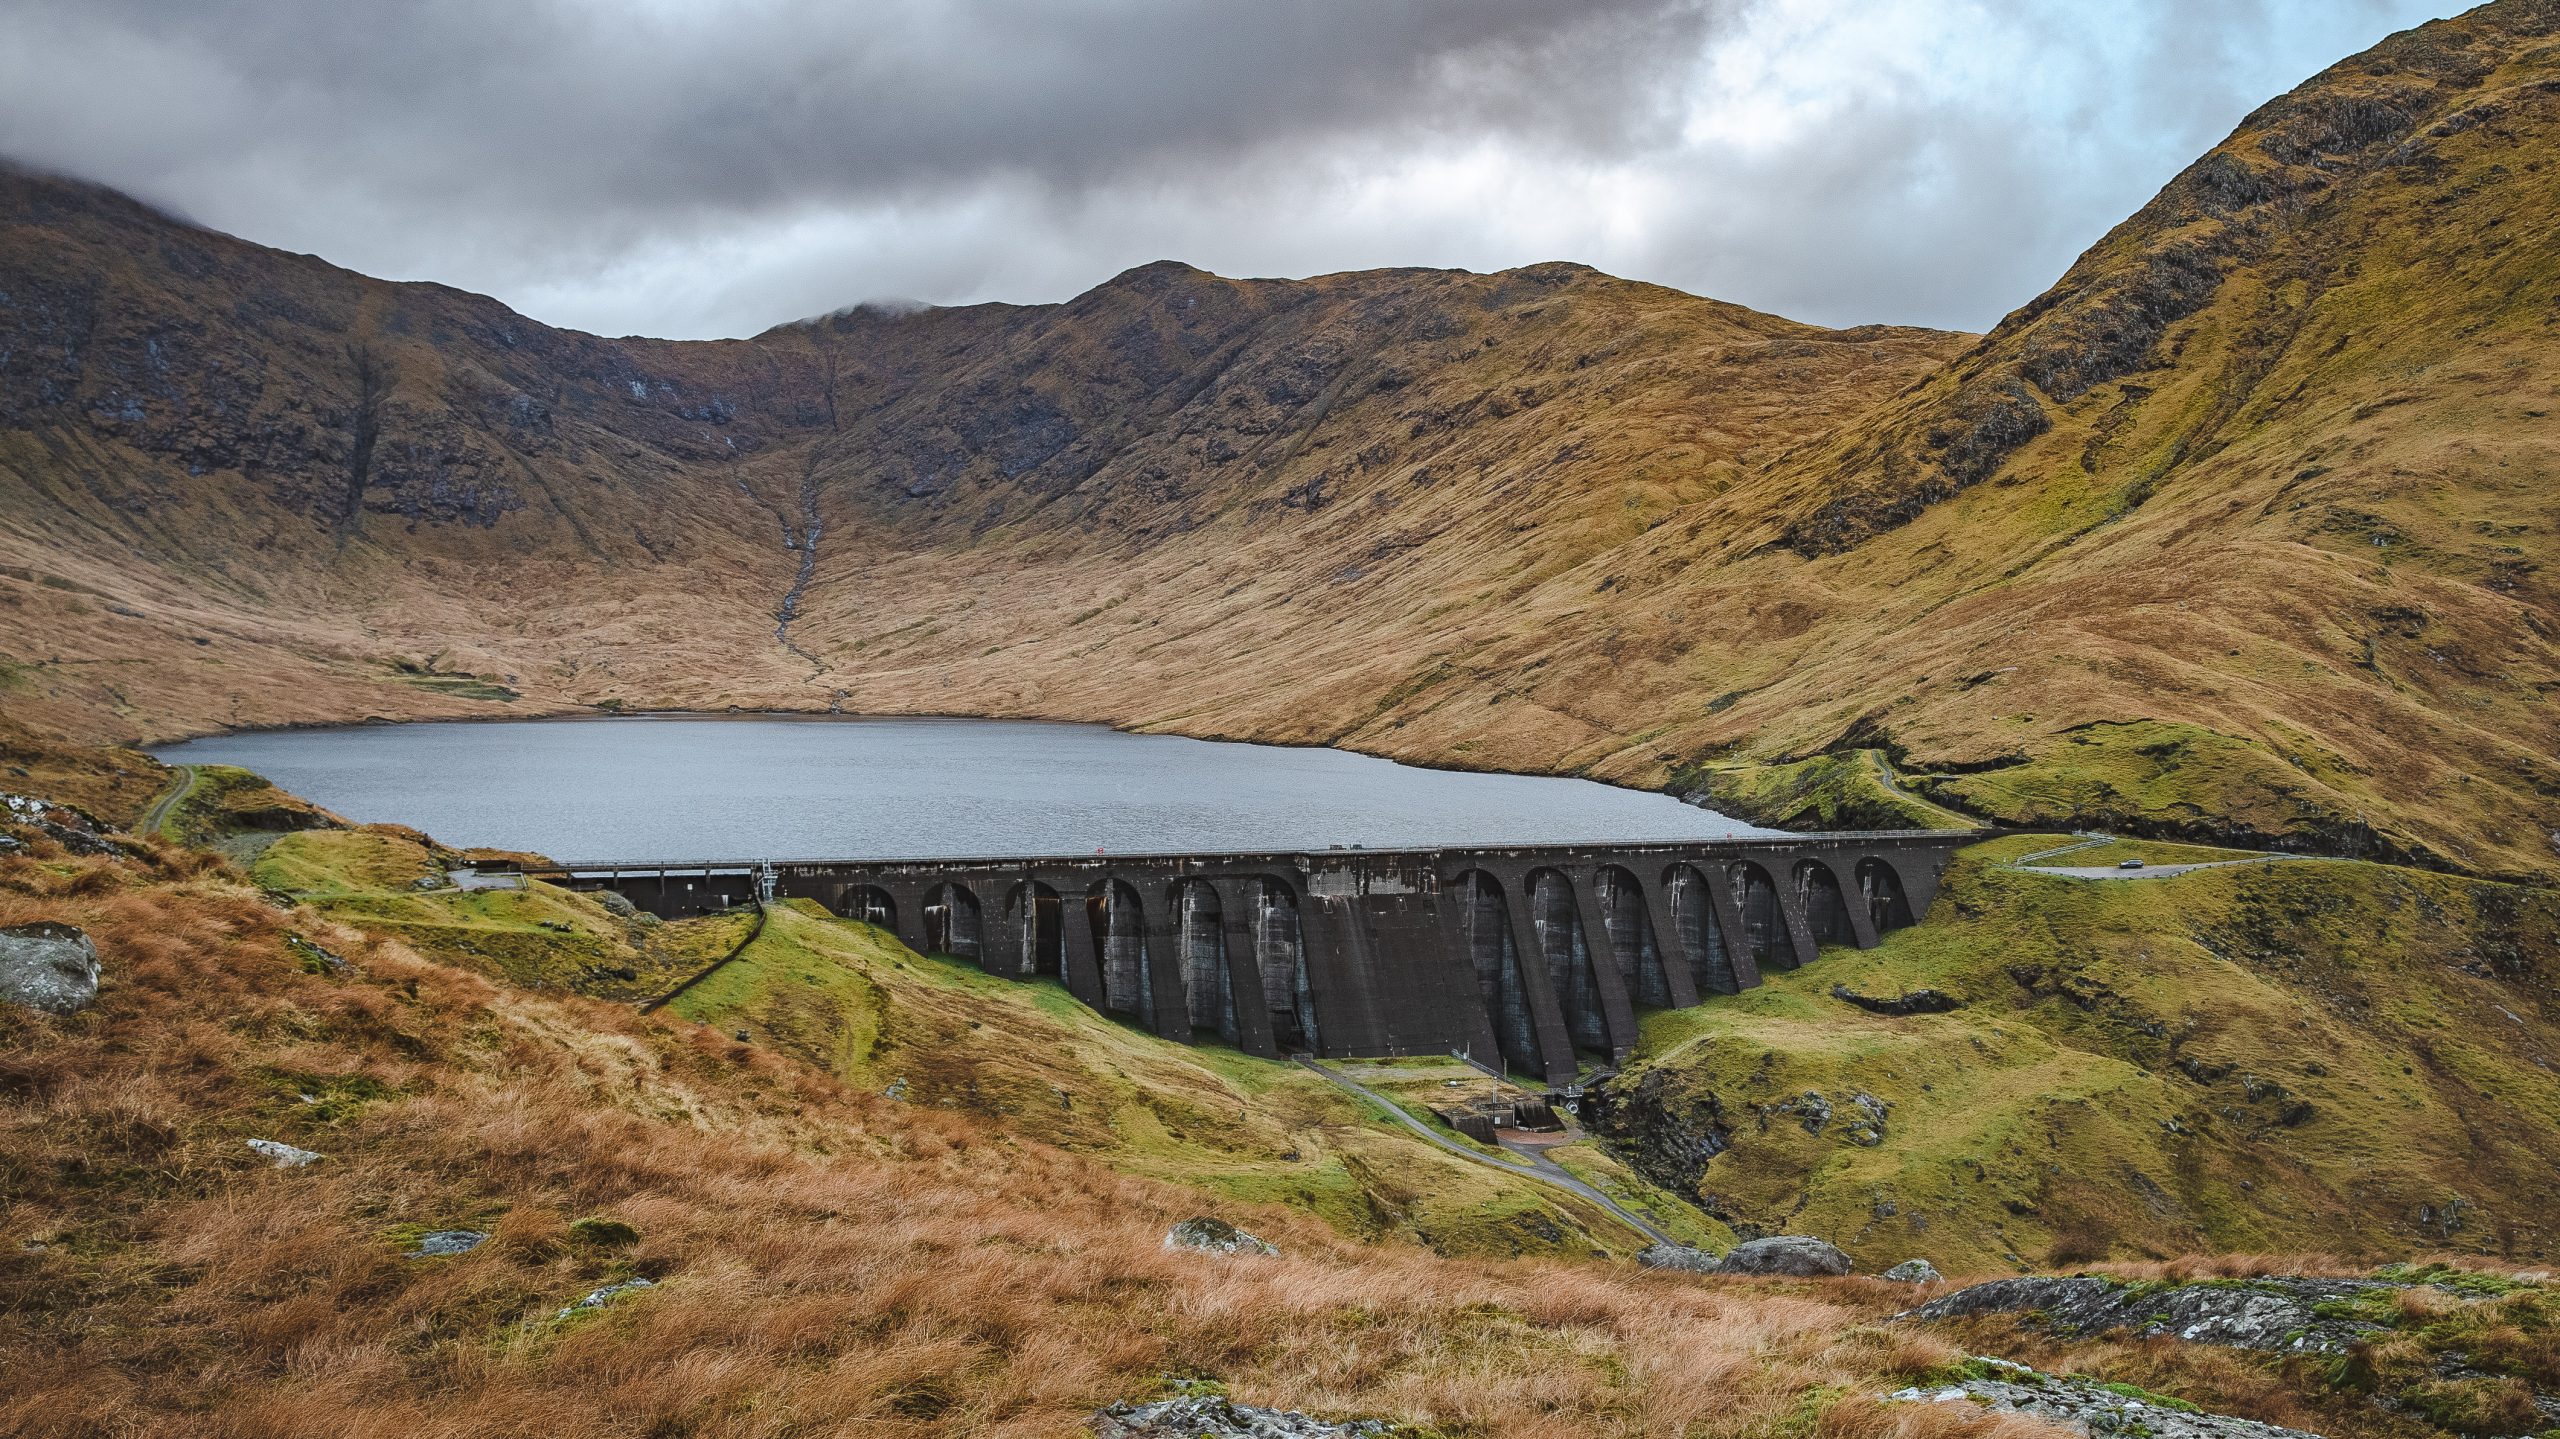 Cruachan helps support intermittent renewable power like wind and solar.